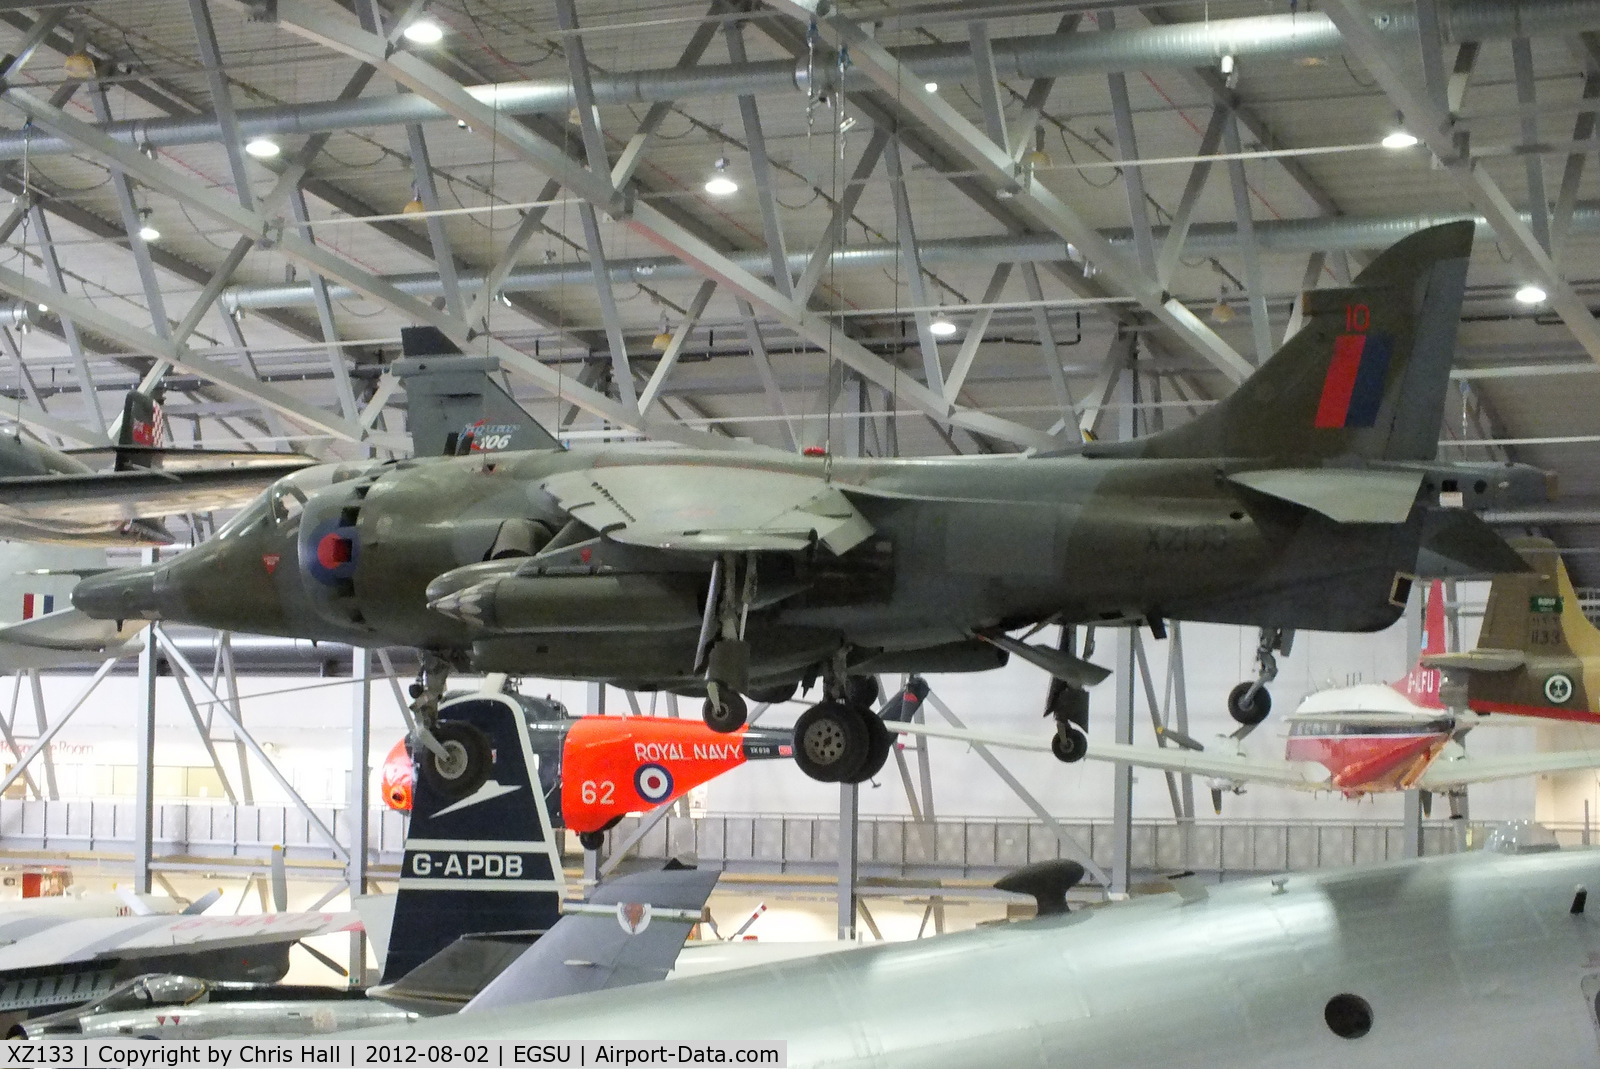 XZ133, 1976 Hawker Siddeley Harrier GR.3 C/N 712192, former Falklands war veretan suspended from the ceiling in the AirSpace hanger, IWM Duxford